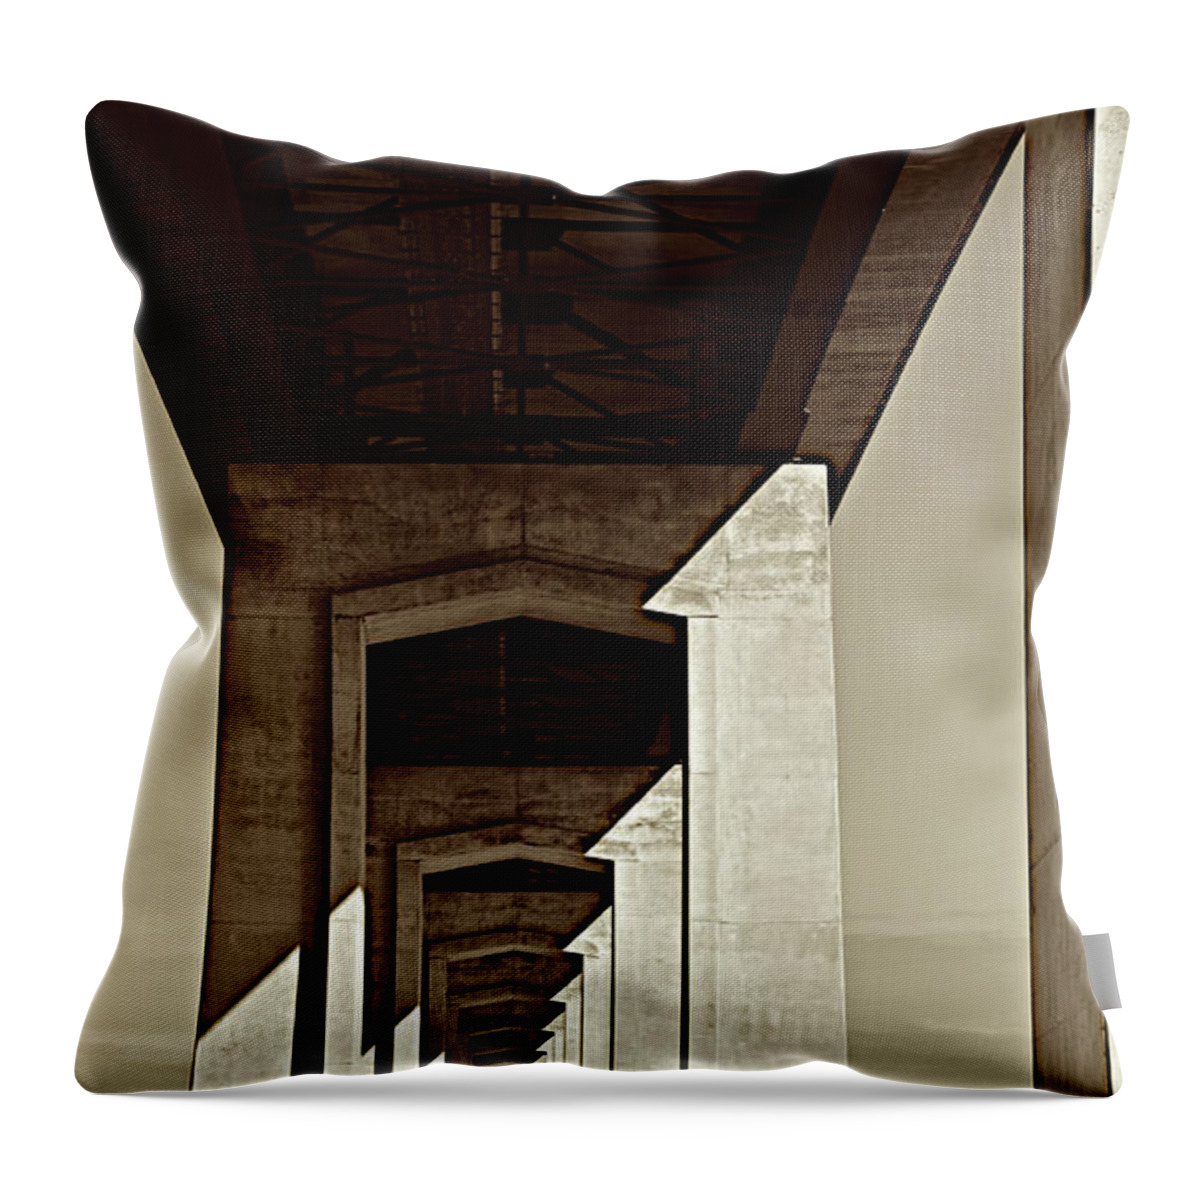 Copyright Elixir Images Throw Pillow featuring the photograph Under the Bridge by Santa Fe